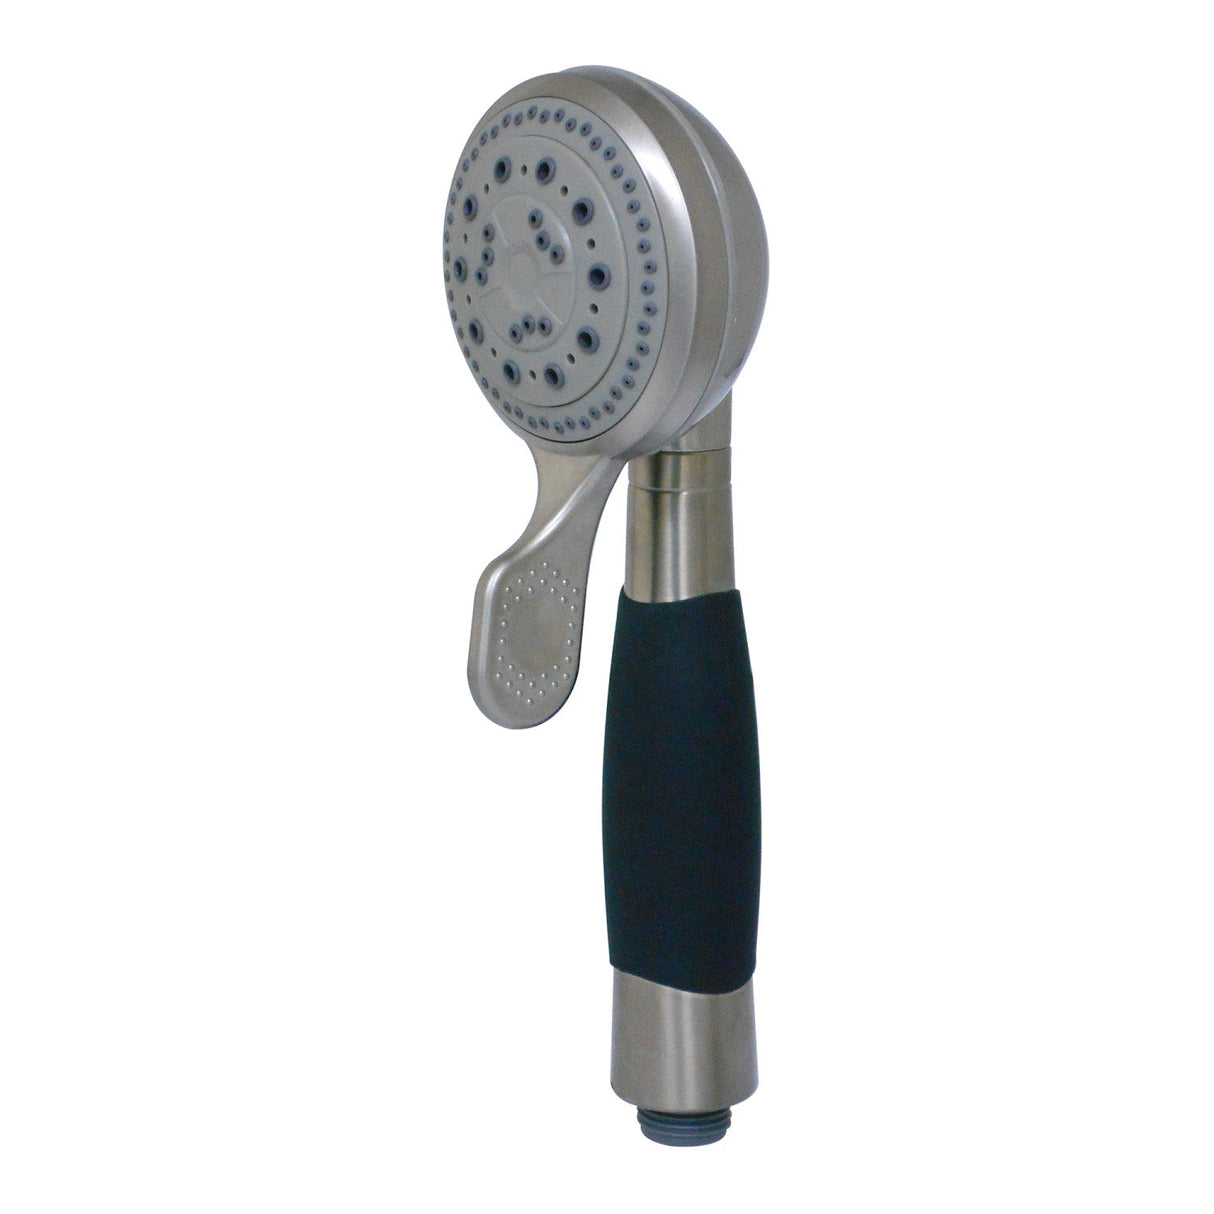 Kaiser K511A8 5-Function Hand Shower, Brushed Nickel/Gray